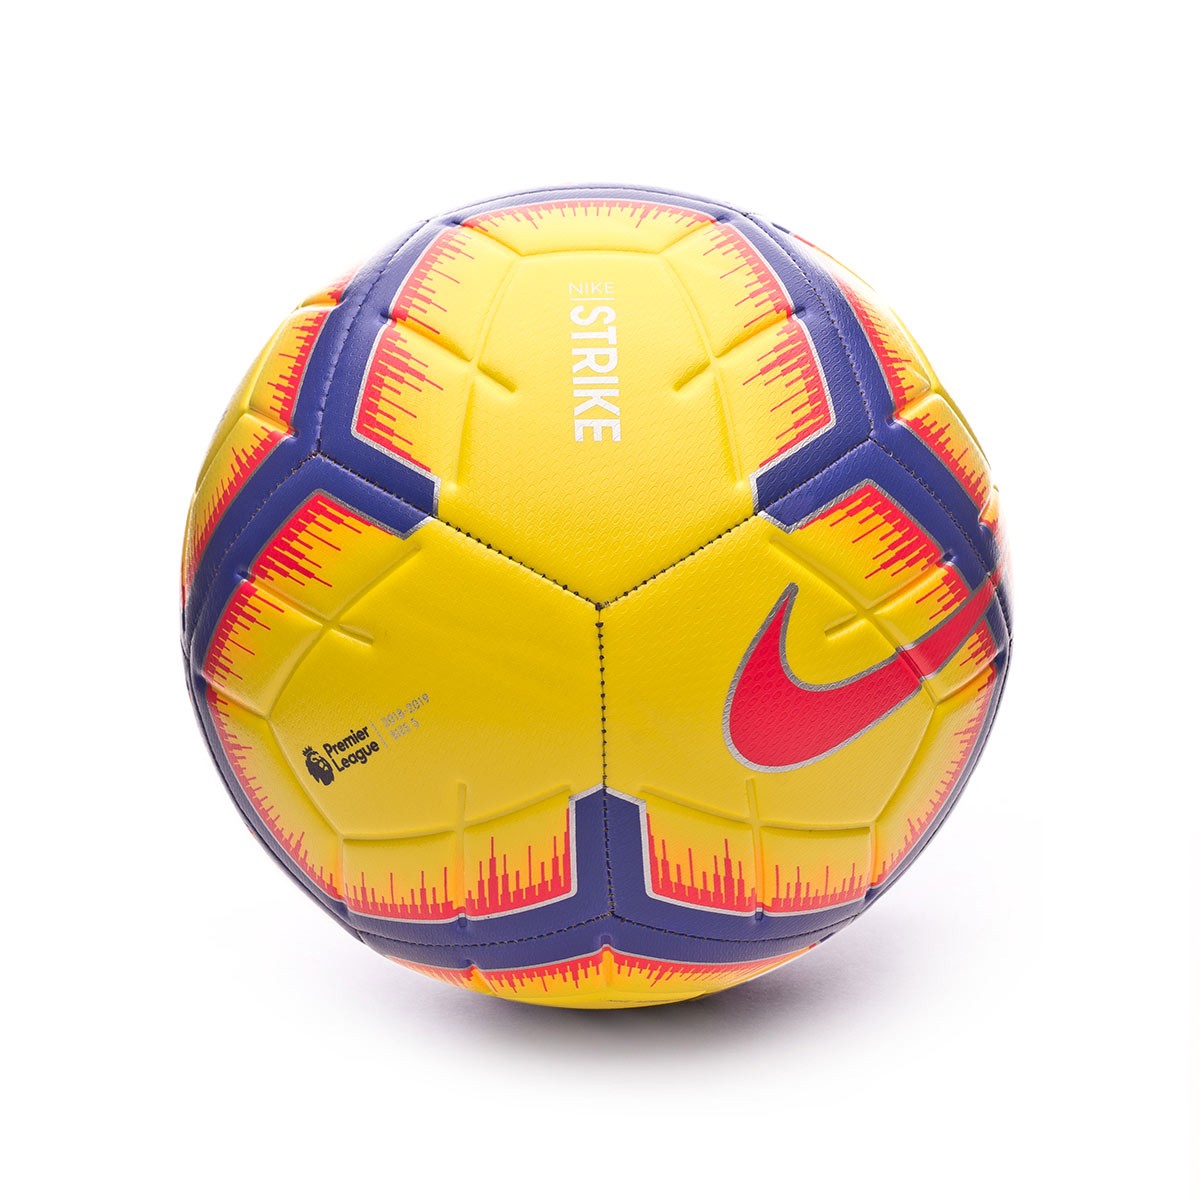 yellow and purple premier league football